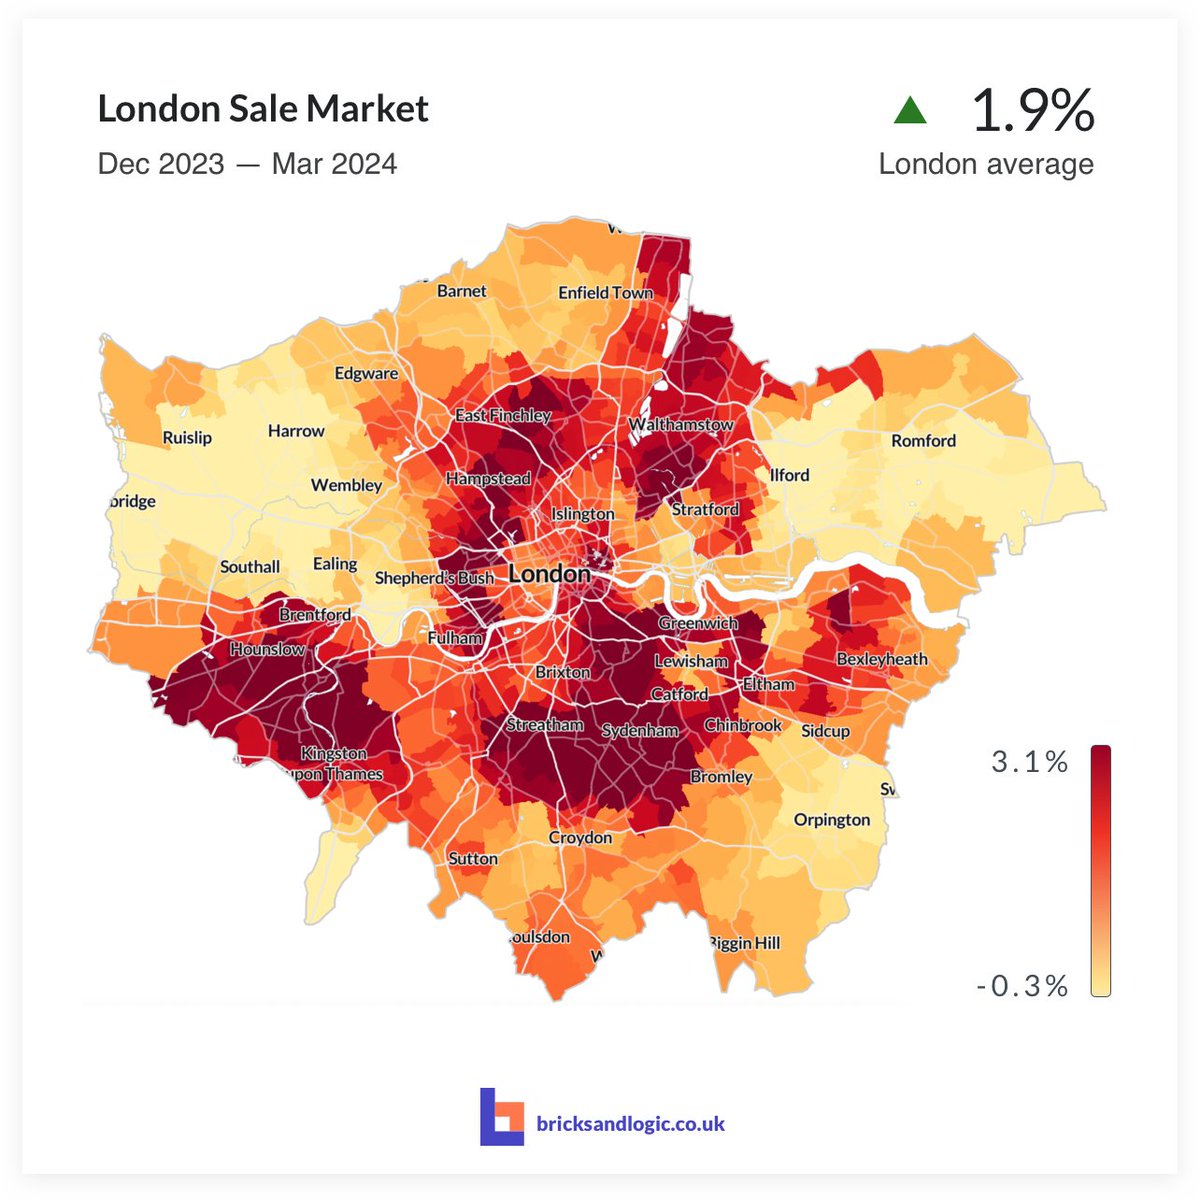 Across #London, the average sale value rose by 1.9% over the past 3 months varying between 0.3% growth to 3.1% growth depending on location.
Check out the full update: bricksandlogic.co.uk/blog/april-202…
#ukhousing #londonproperty